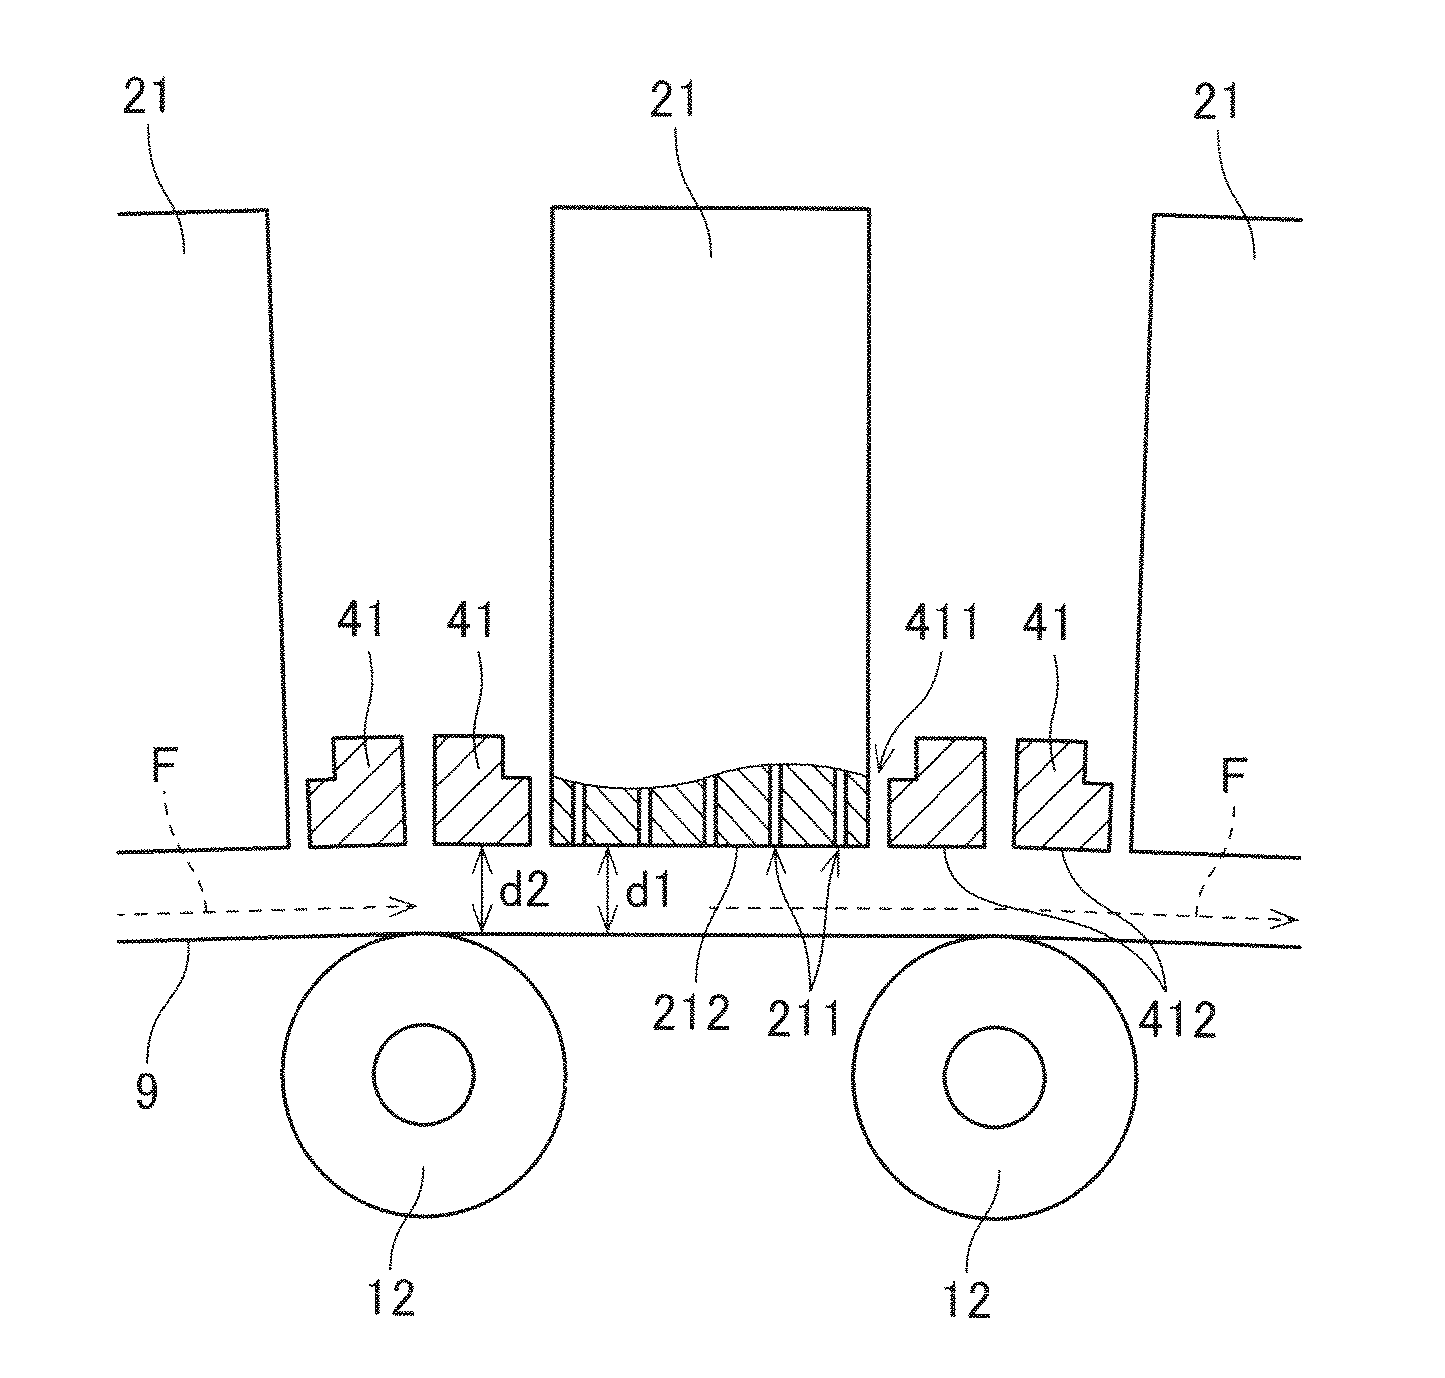 Inkjet apparatus and method of collecting mist